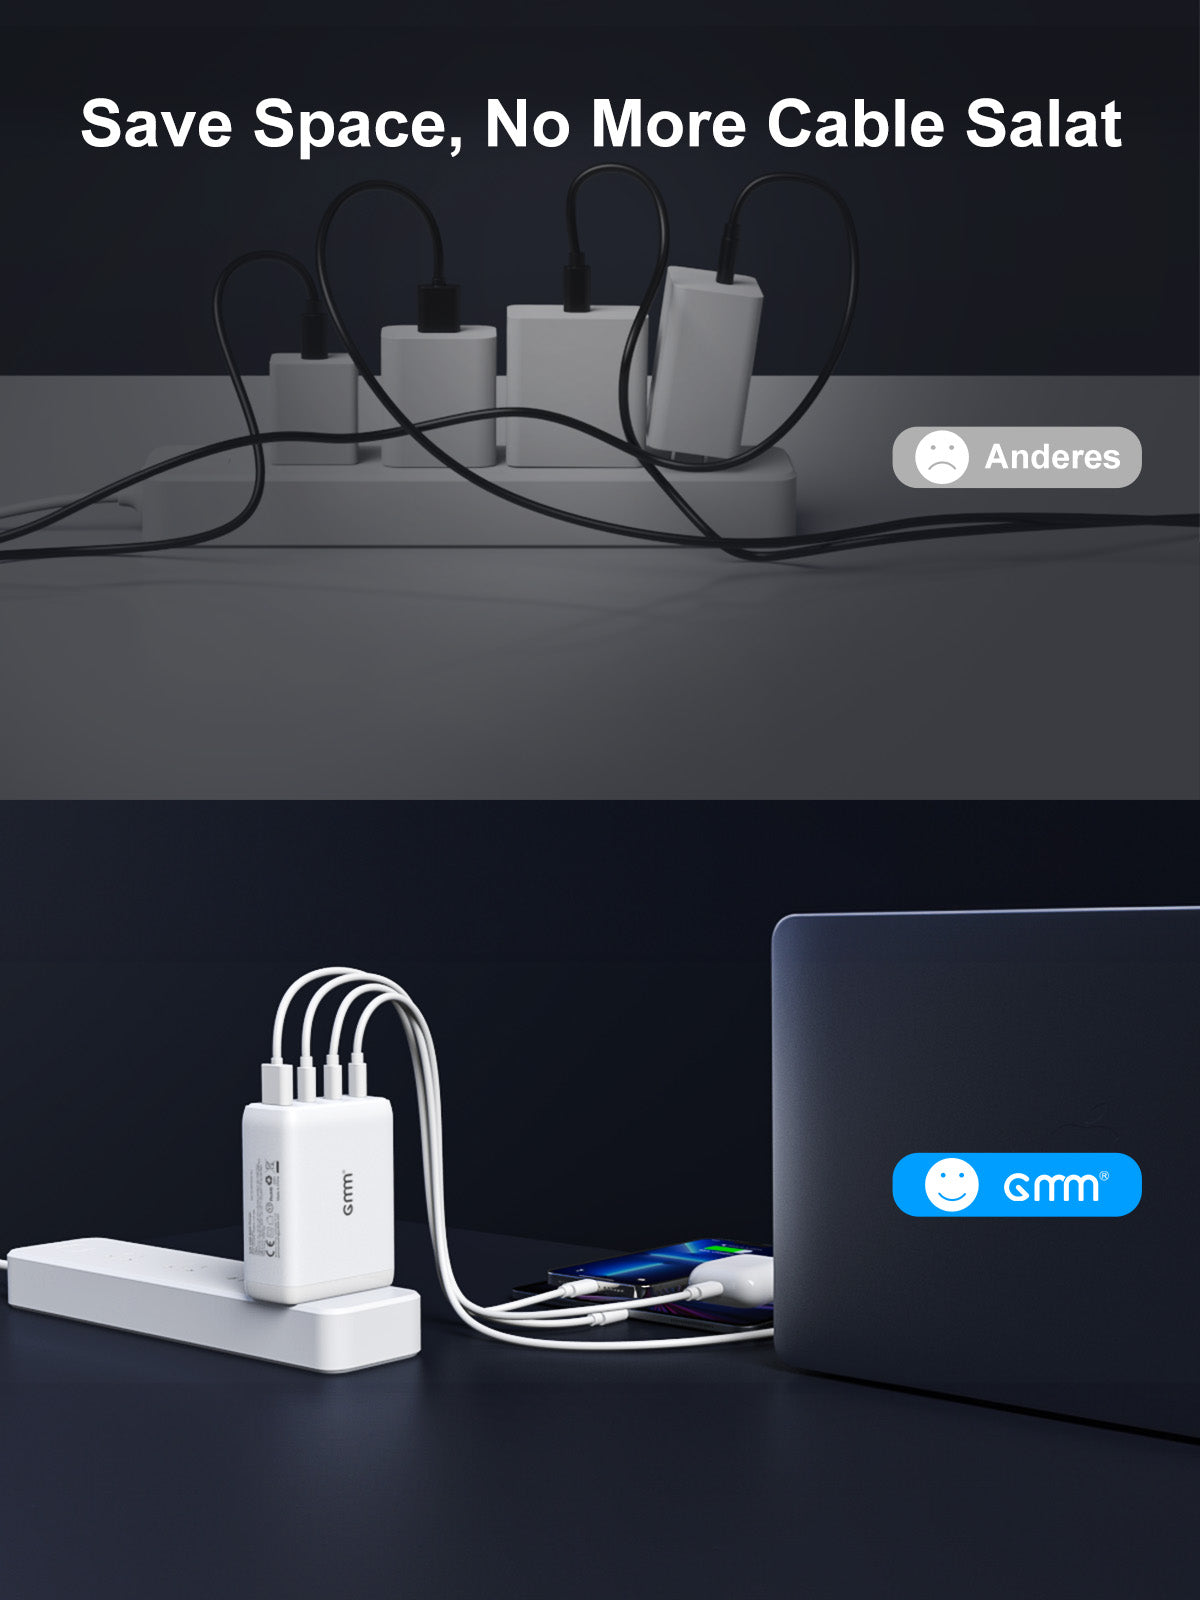 GMM 120W USB C Charger for MacBooks iPhone